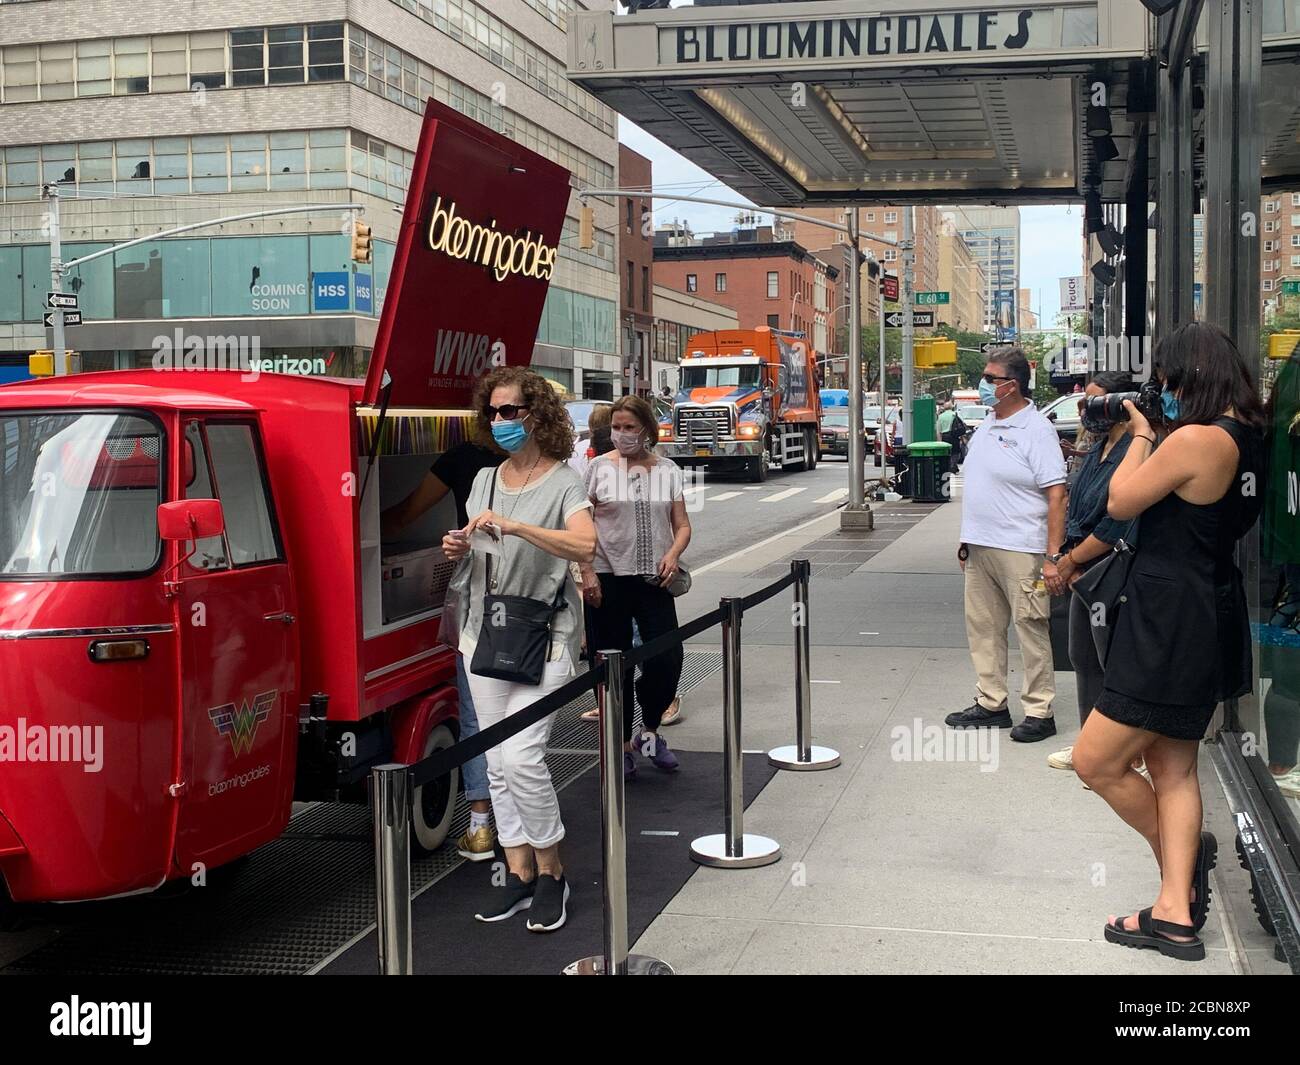 New York, USA. 14th Aug, 2020. (NEW) Free Ice Creams to promote Wonder Woman 1984 movie at Bloomingdales. August 14, 2020, New York, USA: Free ice creams are given out to people in front of Bloomingdales on Lexington Avenue in an effort to promote the movie Wonder Woman 1984 (WW84). The movie products are been exhibited inside Bloomingdales.Credit : Niyi Fote /Thenews2 Credit: Niyi Fote/TheNEWS2/ZUMA Wire/Alamy Live News Stock Photo